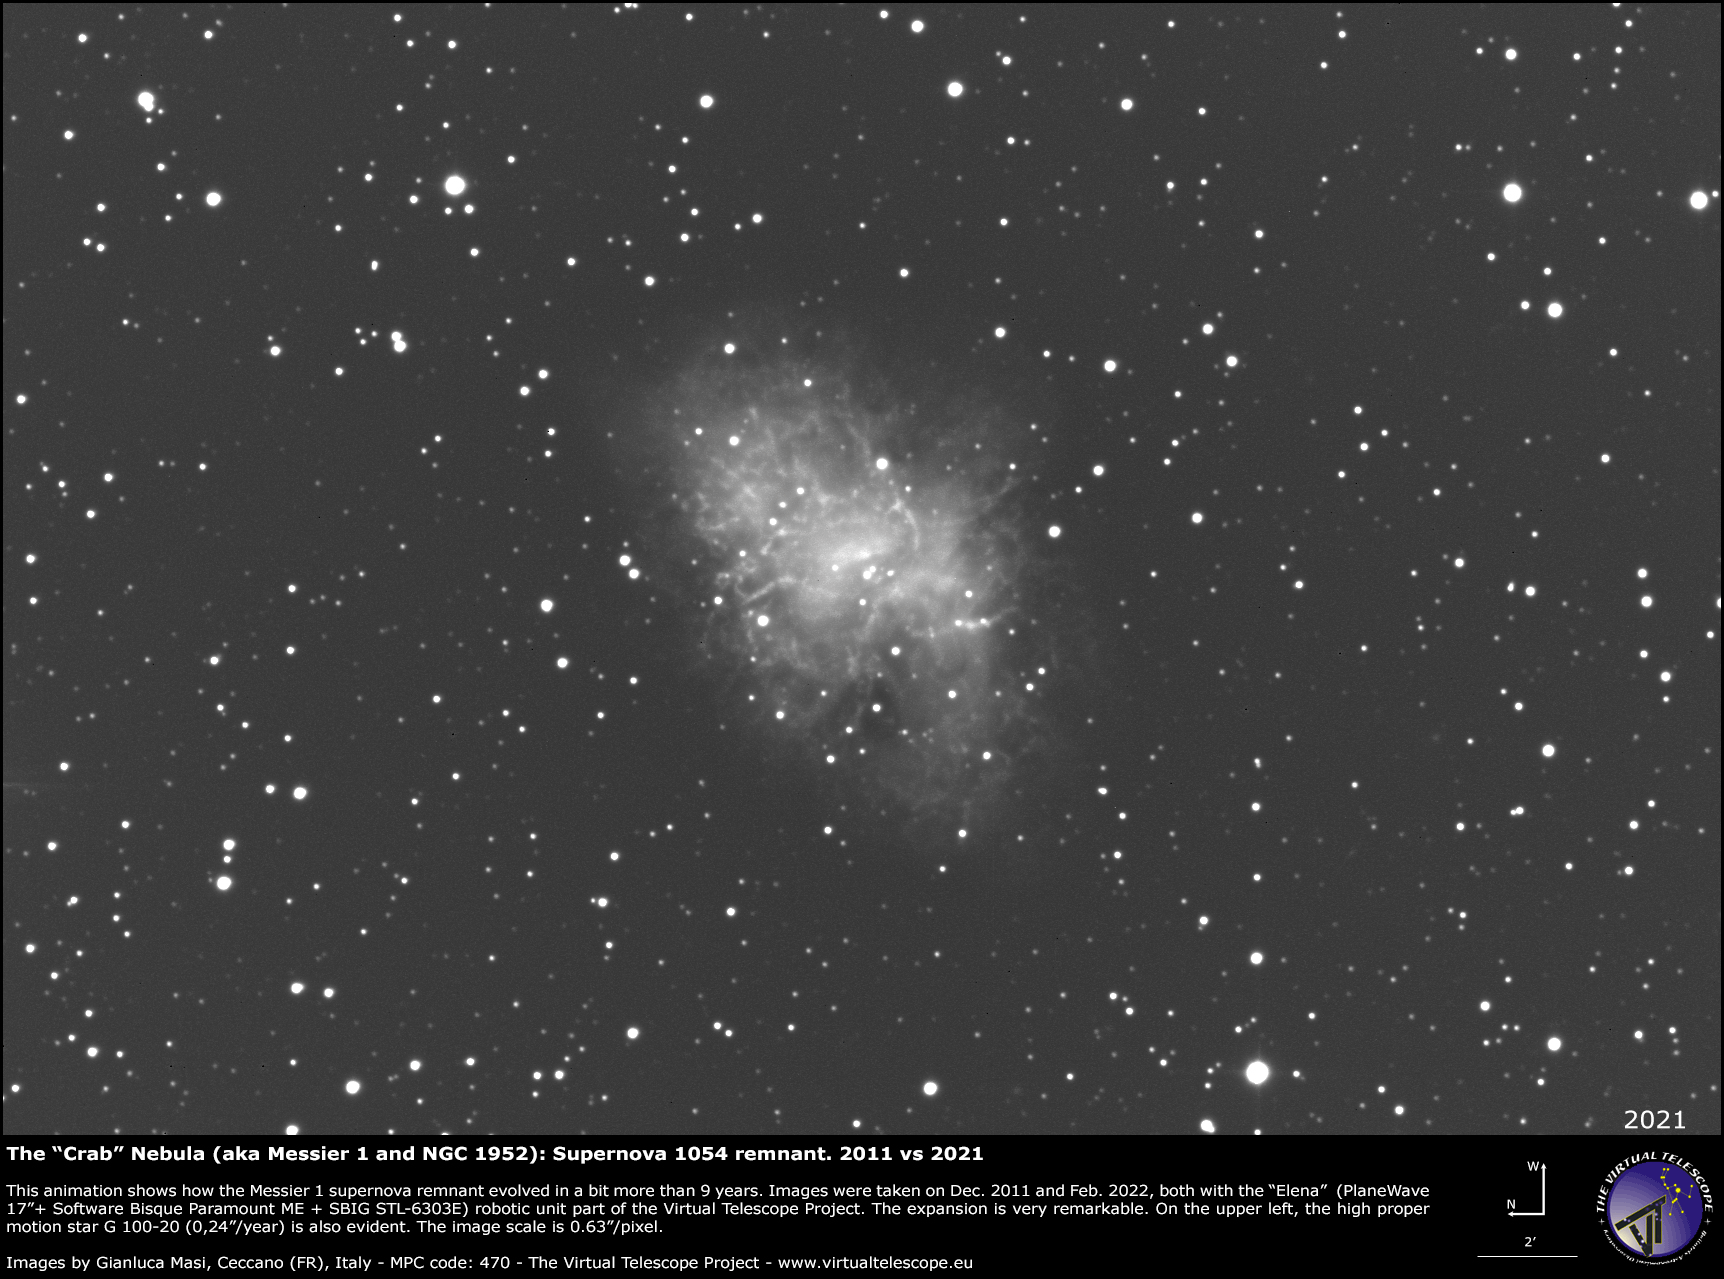 The Crab Nebula: 2011 vs 2021 images. Click on the image for the HD version.